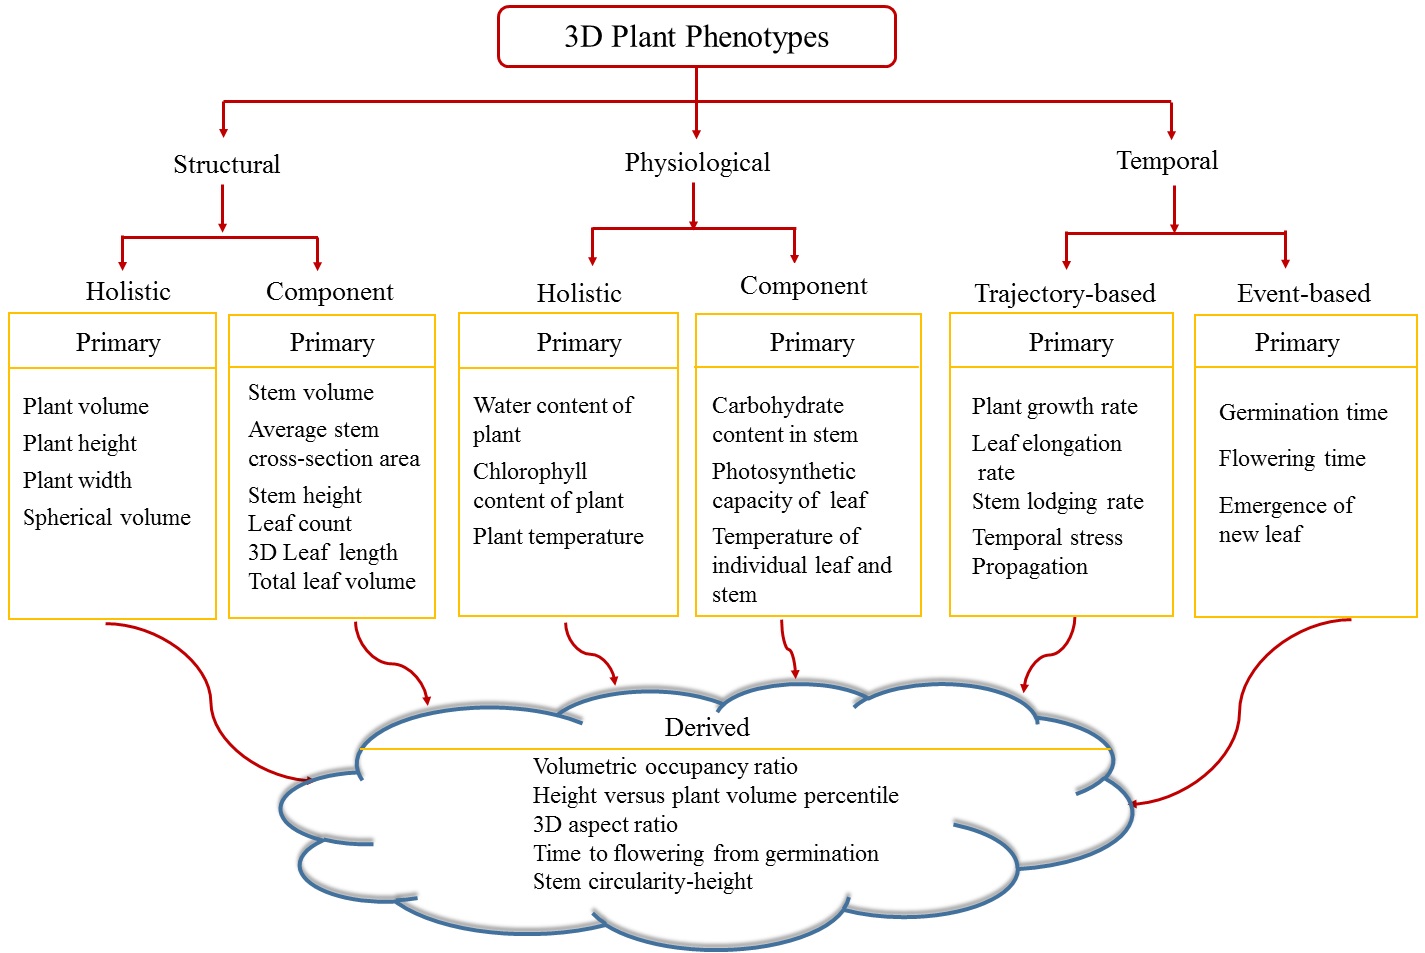 A taxonomy of 3D phenotypes